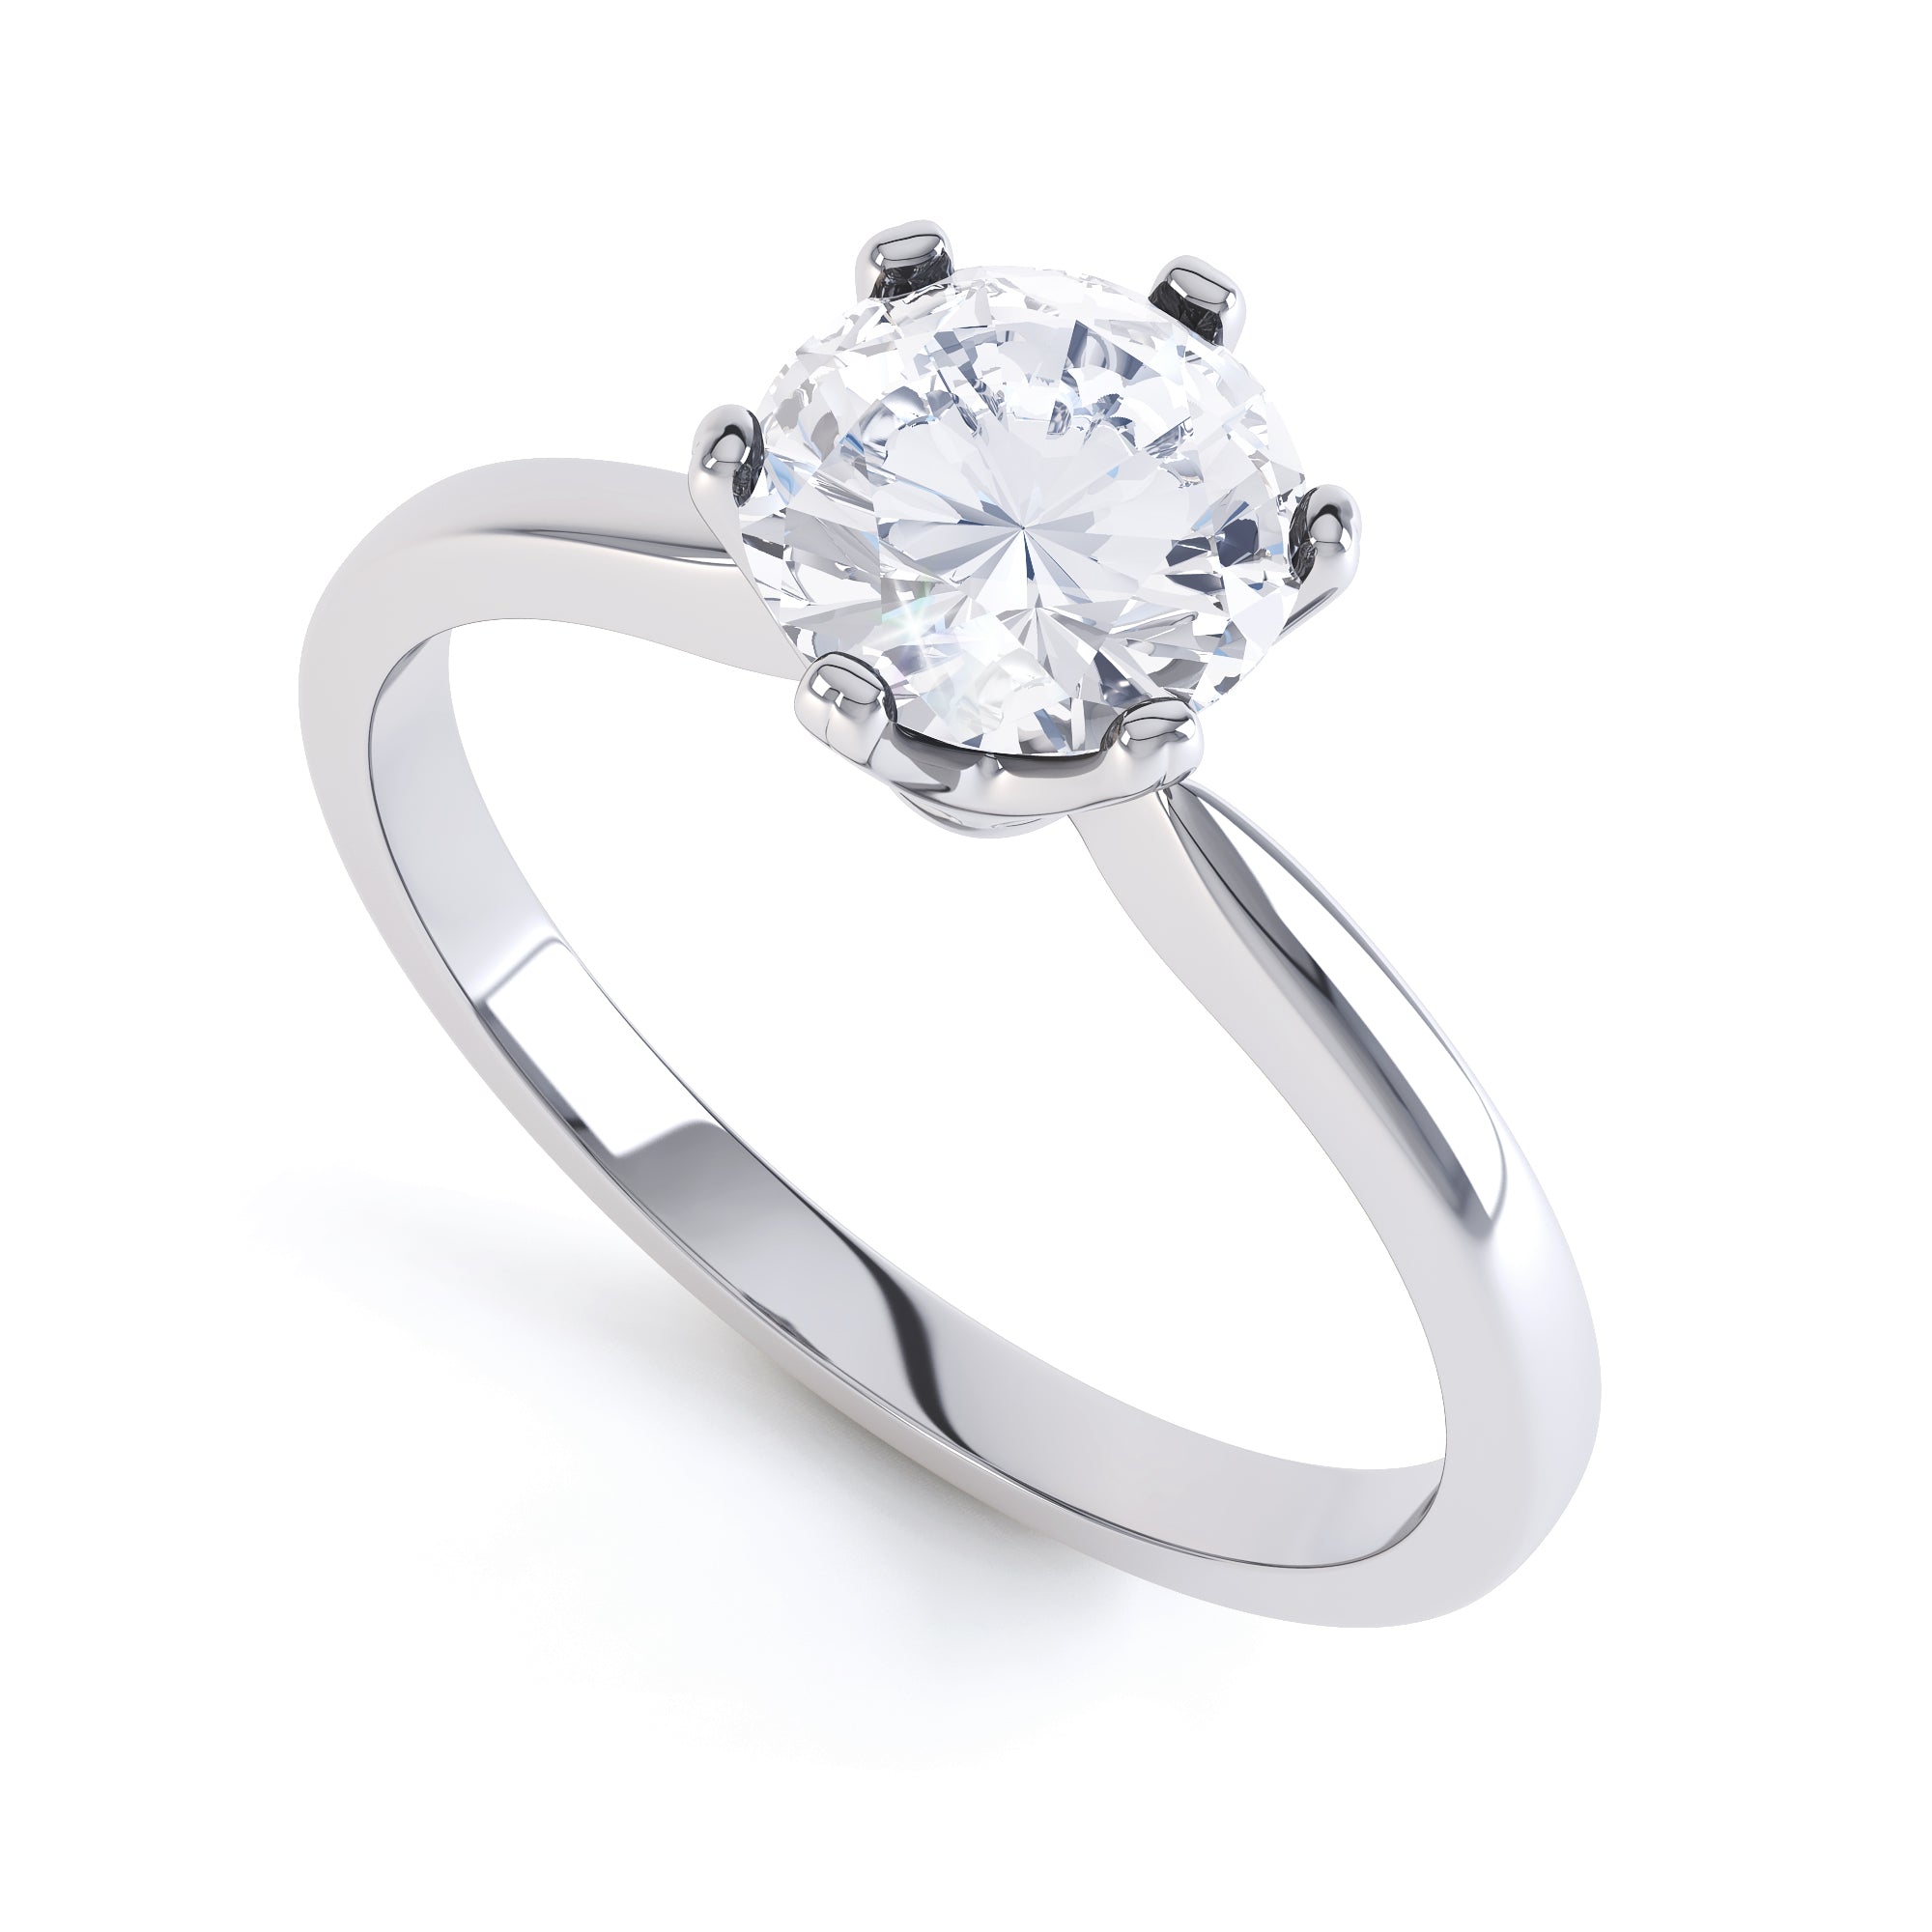 Round Brilliant Cut Centre Stone, Six Claw, Knife edge Shoulders, Diamond Engagement Ring